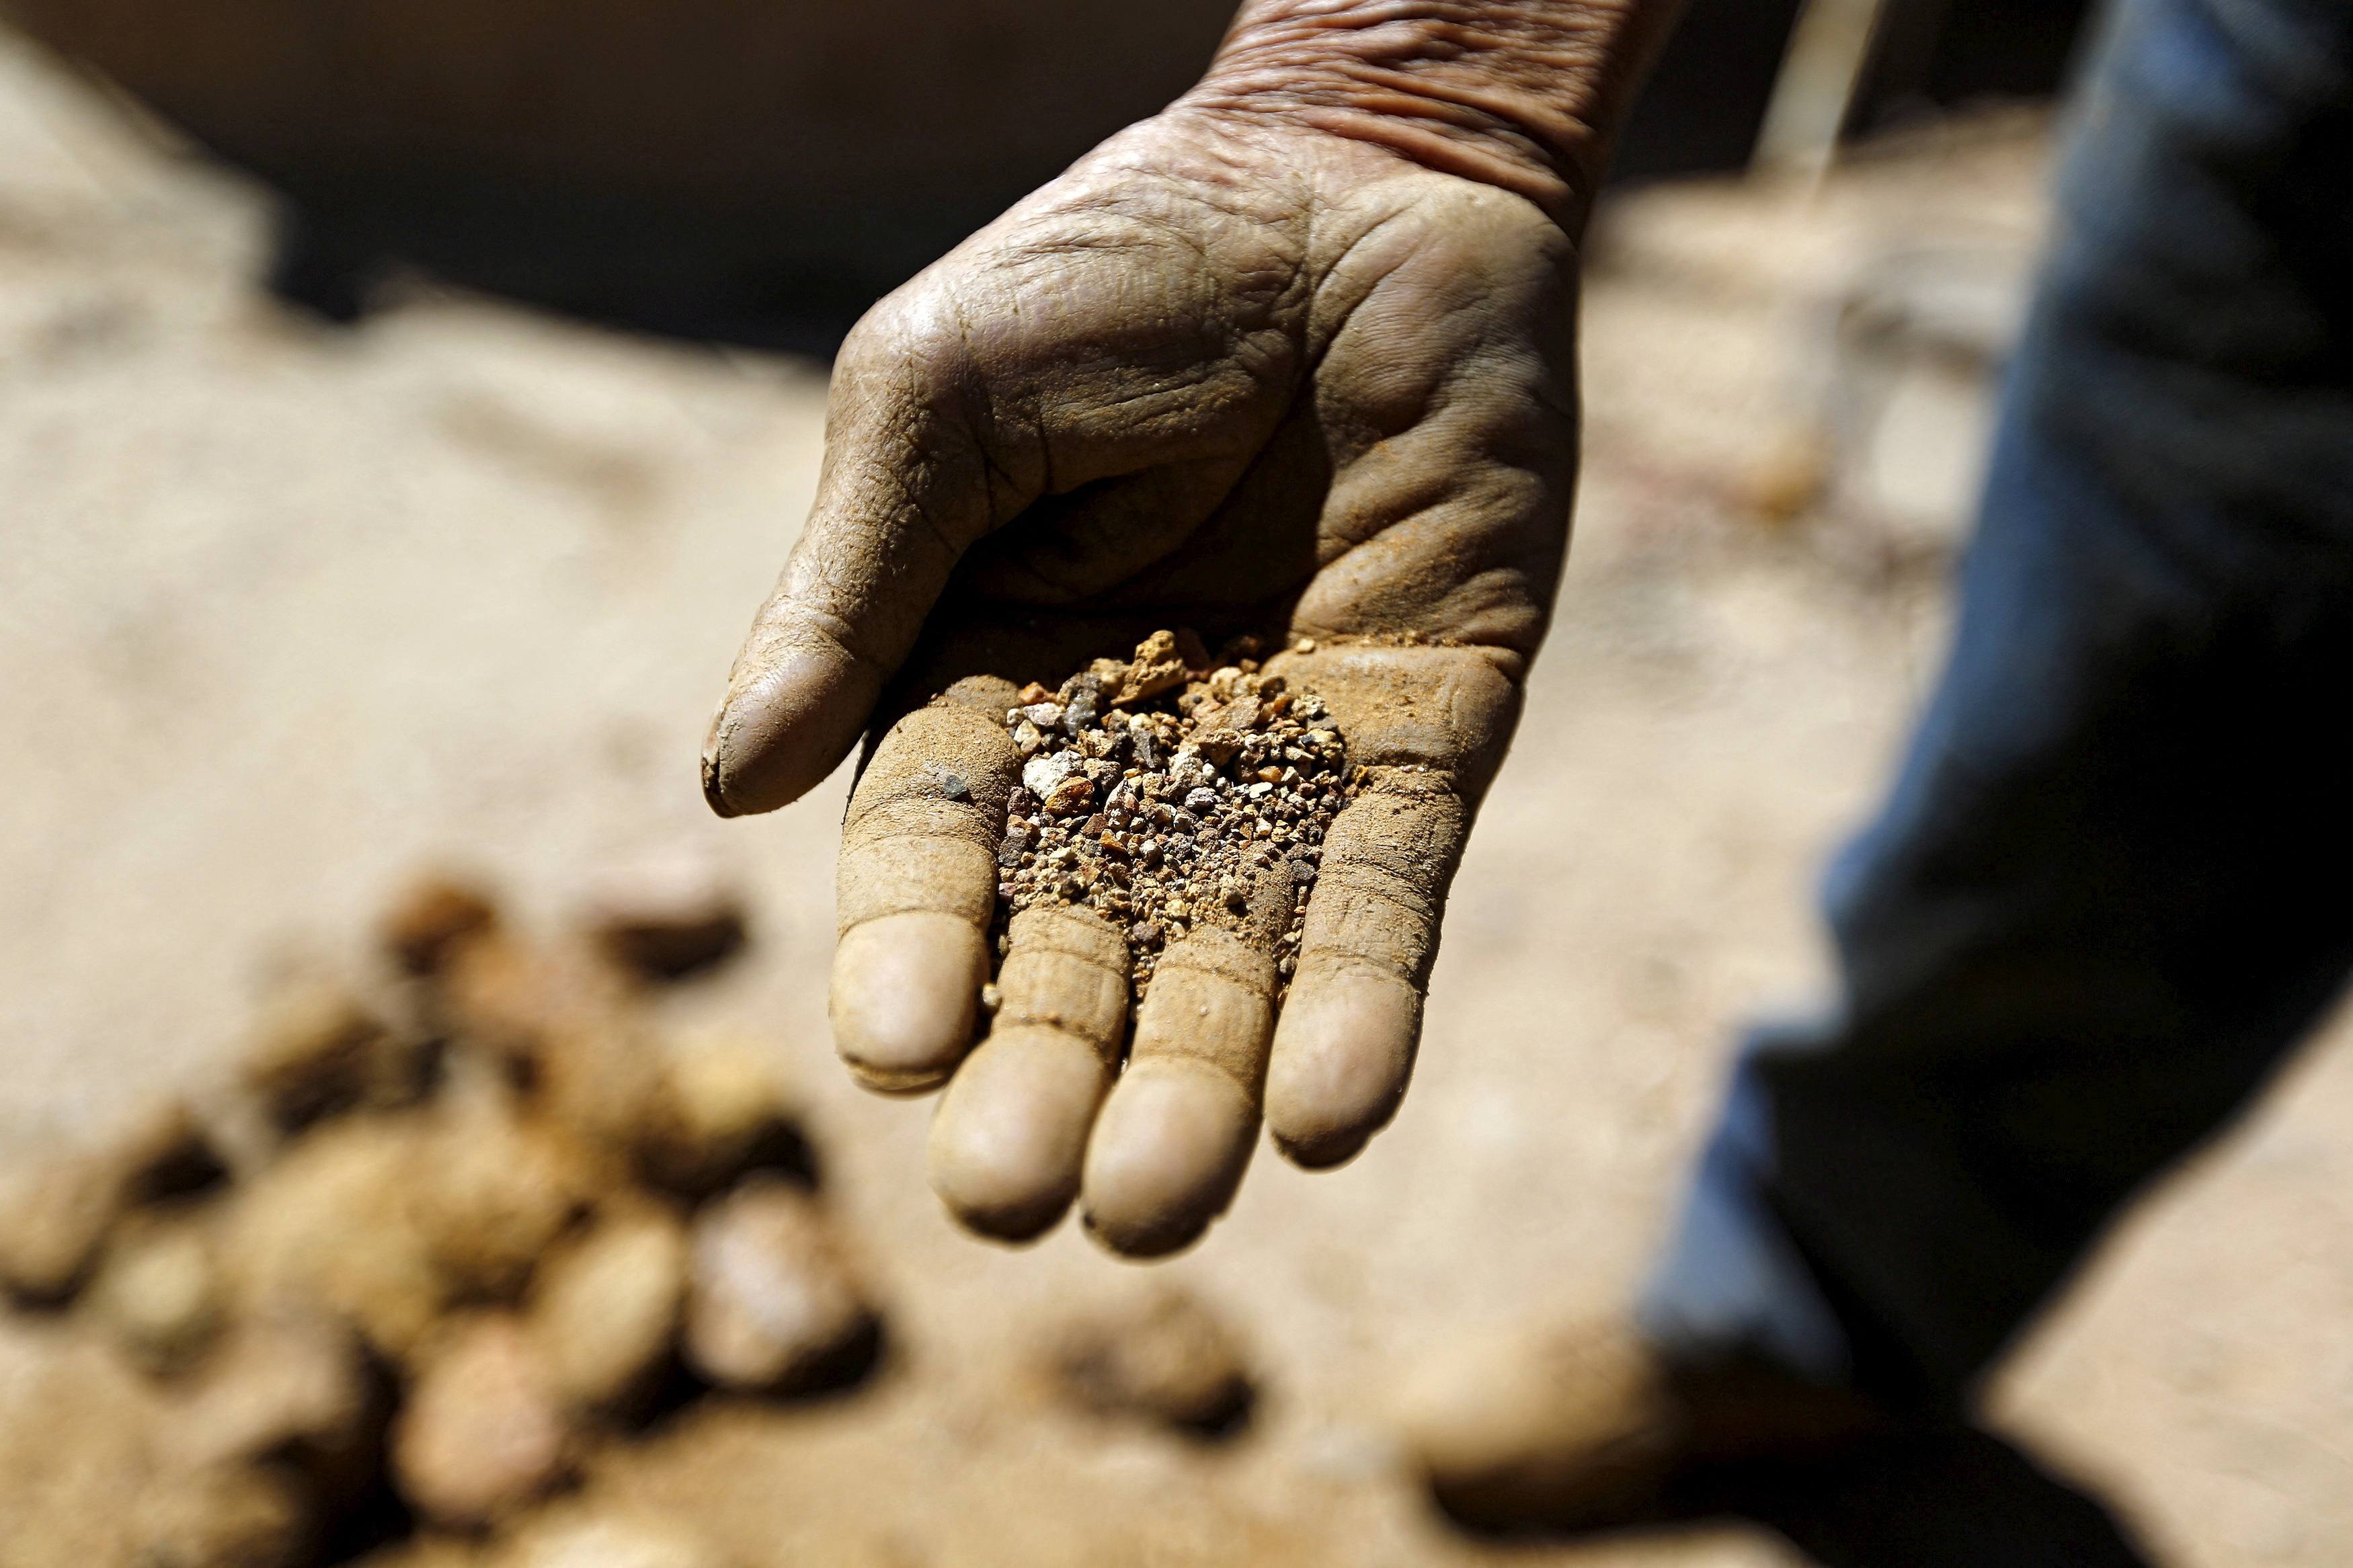 An artisanal miner shows ore at a small copper and gold processing plant of the 